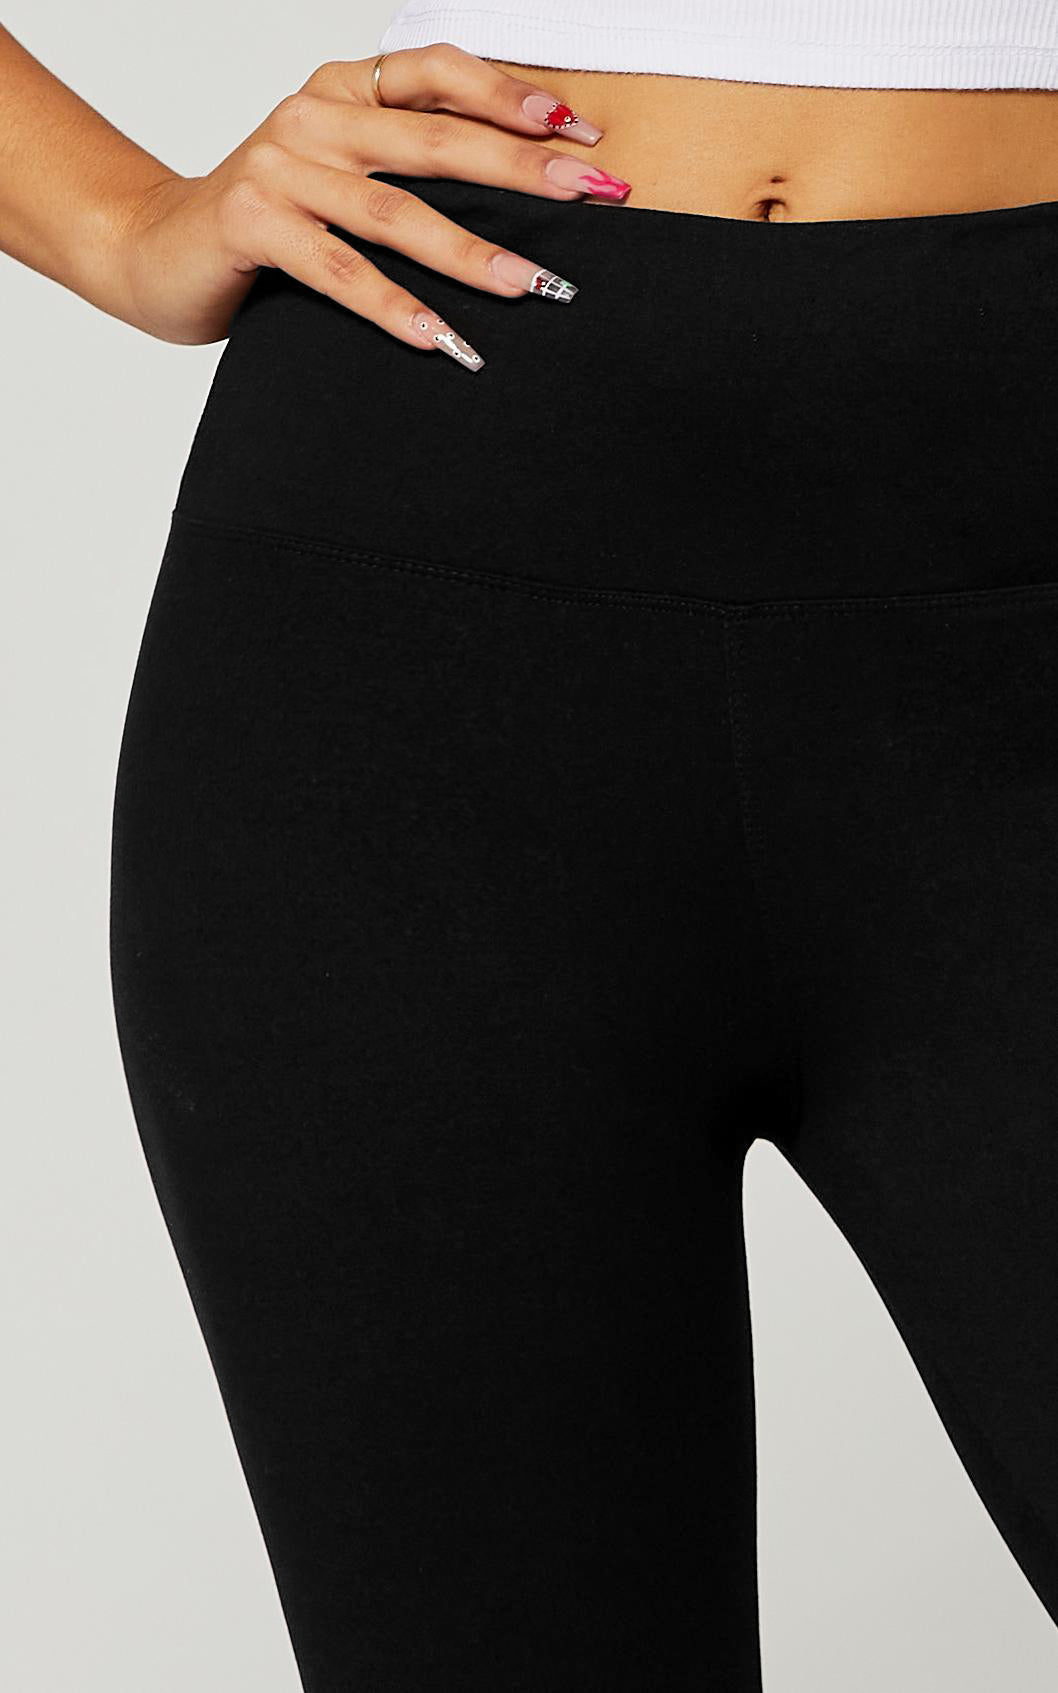 Conceited Black/White Premium Buttery Soft High Waisted Leggings